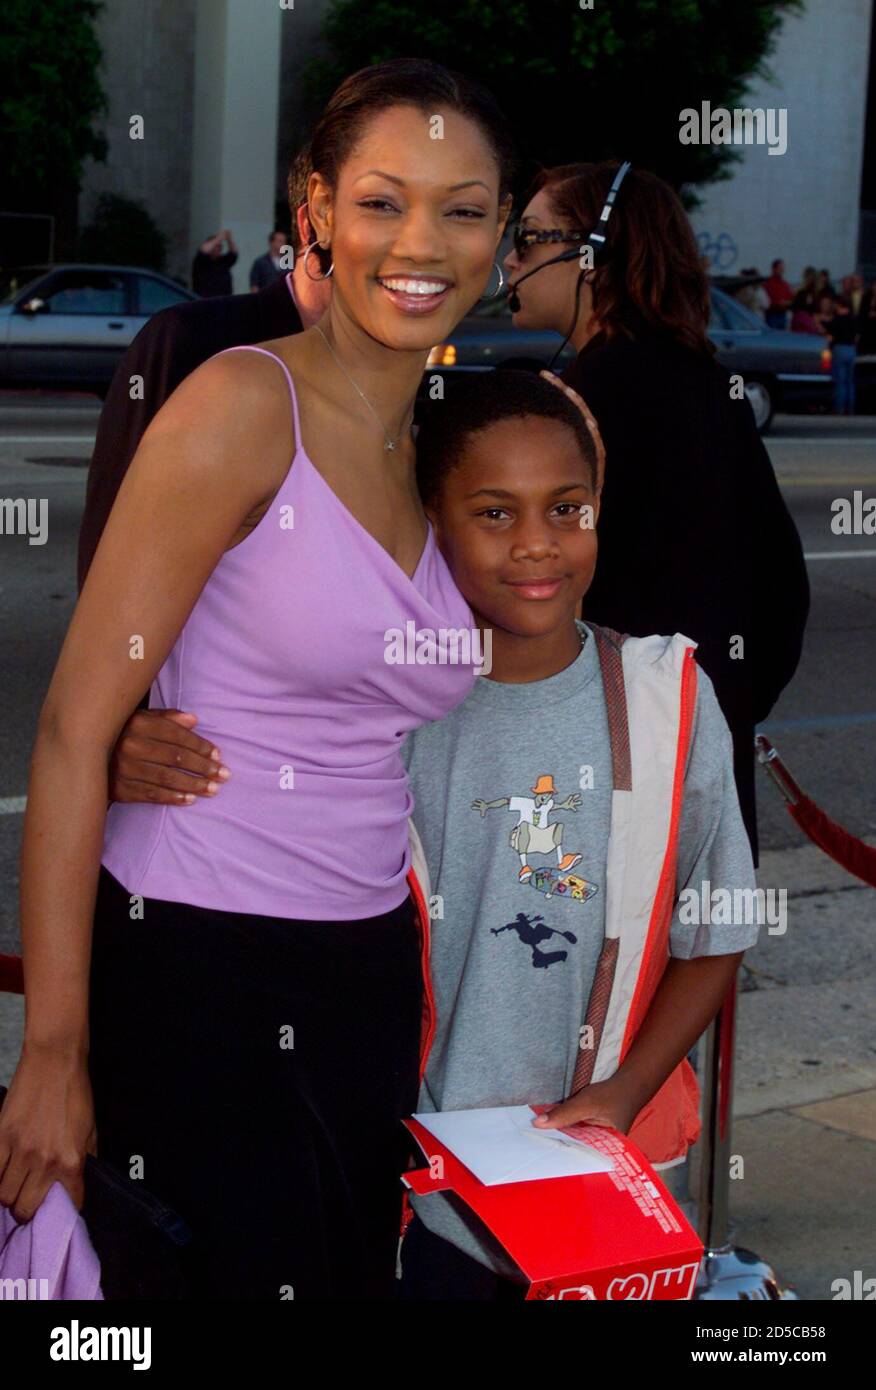 Actress Garcelle Beauvais, who stars in the upcoming film ' Double Take' poses as she arrives with her son Oliver, as guests for the premiere of the new comedy film ' Big Momma's House' starring [Martin Lawrence] May 31 in Hollywood.  [Lawrence portrays a bumbling FBI agent who goes undercover in the film which opens June 2 in the United States. Da Brat is featured on the film's soundtrack.] Stock Photo